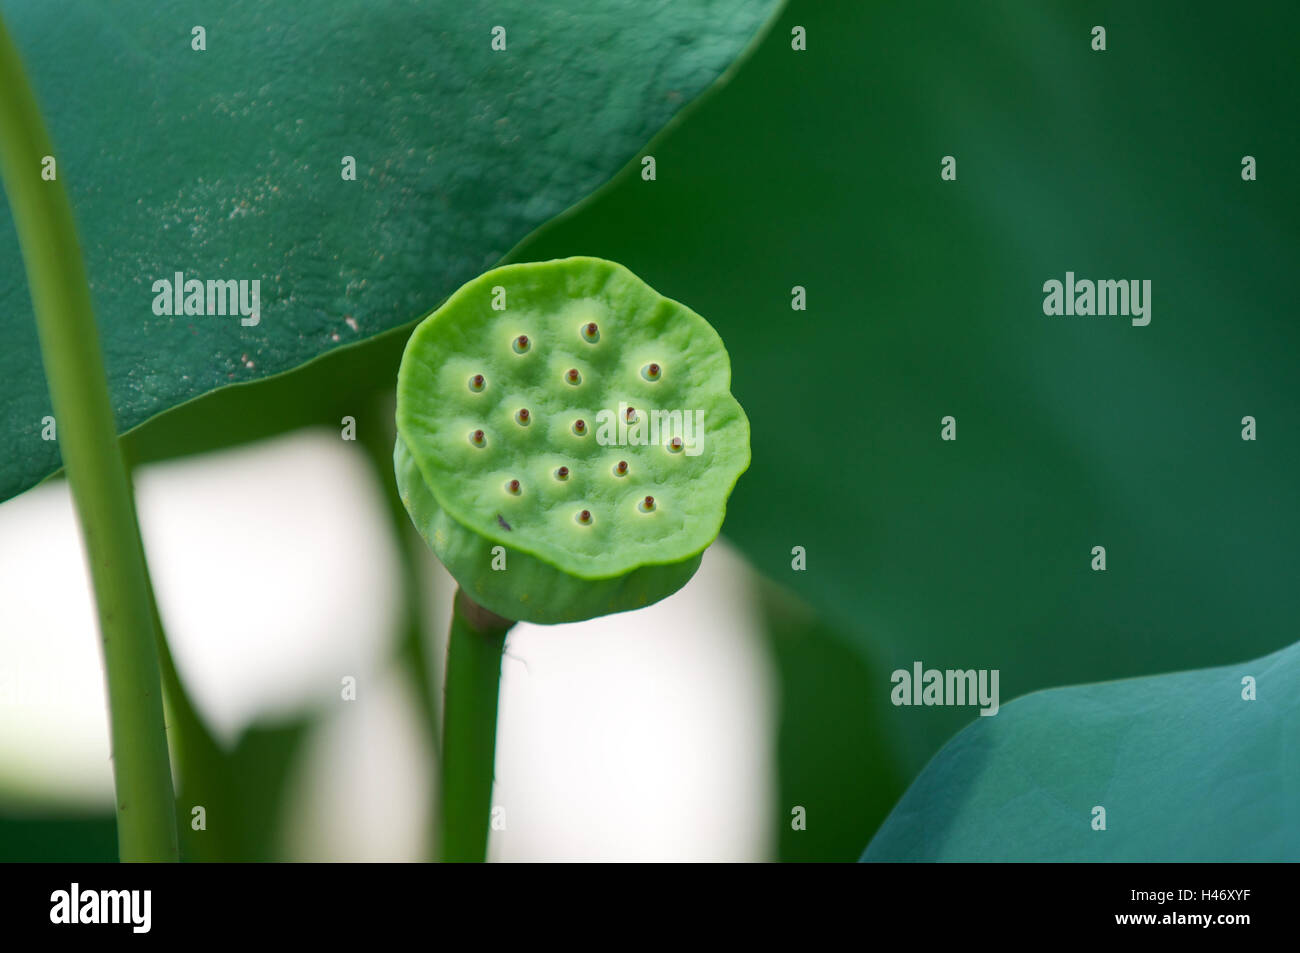 Calyx of a lotus flower, Stock Photo